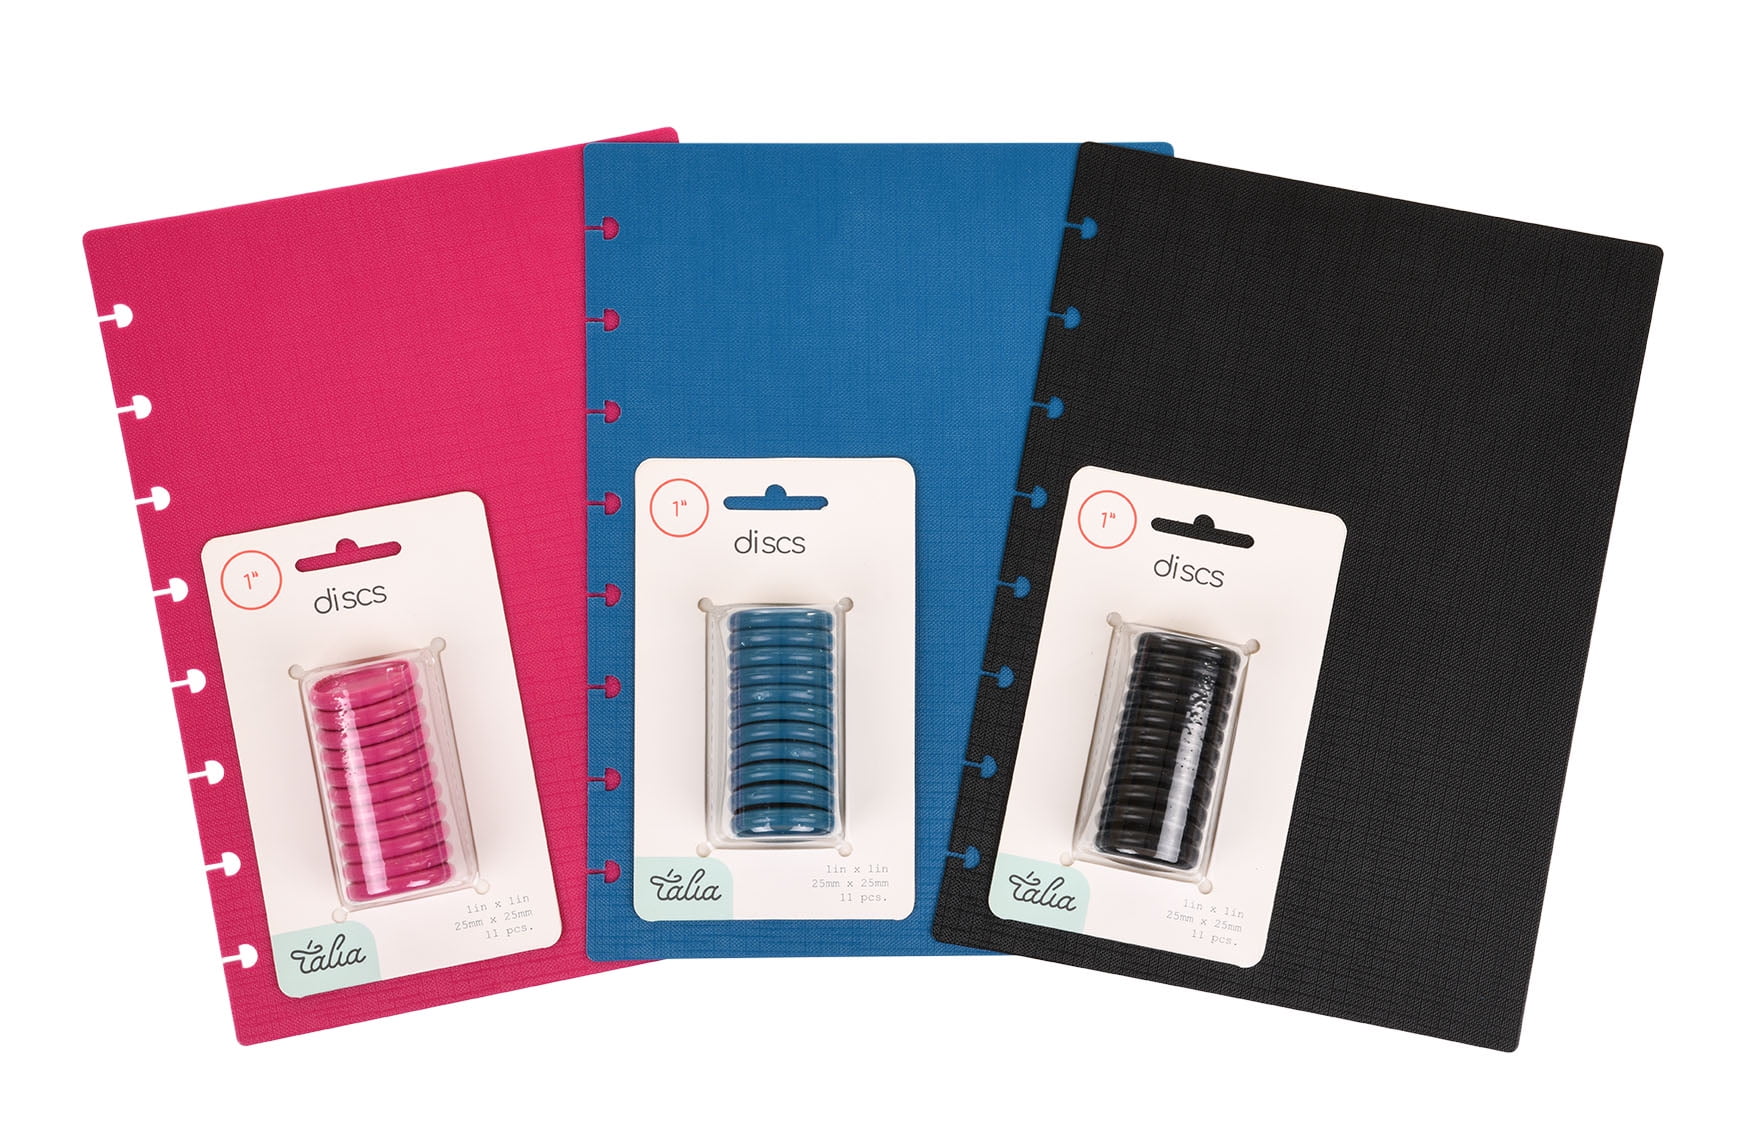 talia-discbound-discs-and-covers-3pk-set-3-black-blue-90-s-pink